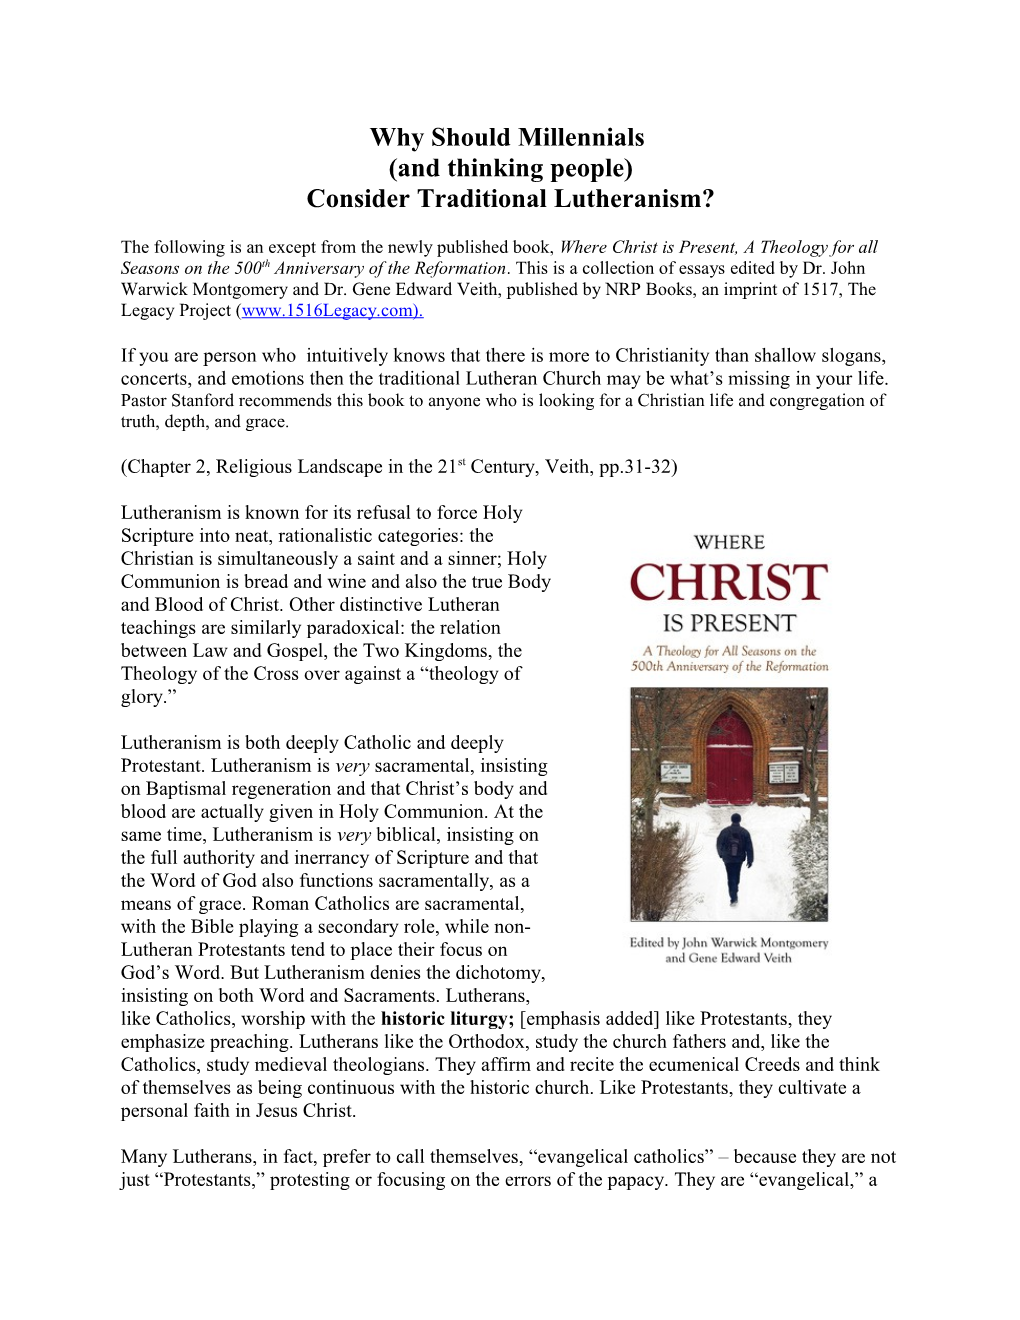 Consider Traditional Lutheranism?